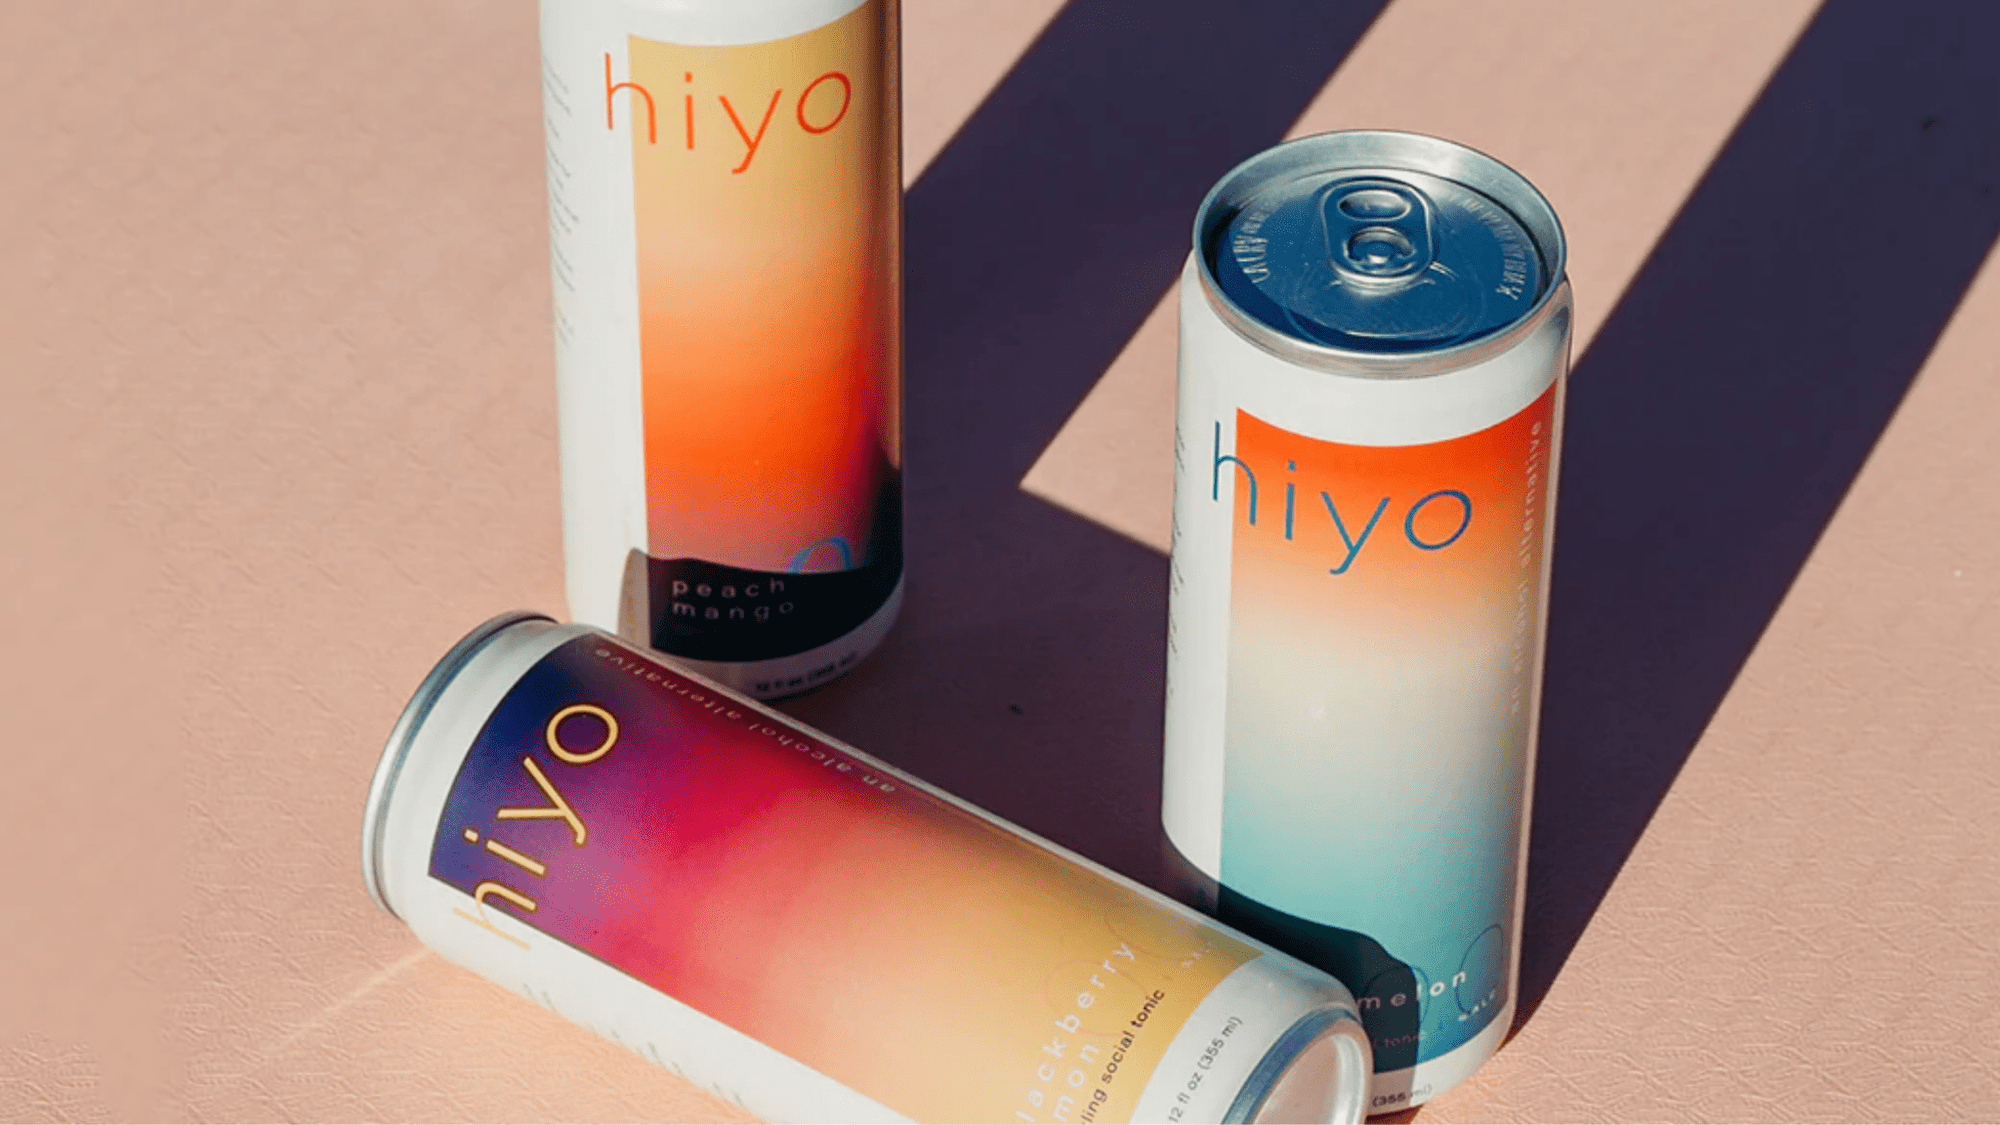 Q&A with Founders of hiyo, The 'Social Tonic' That'll Make You Float - Boisson